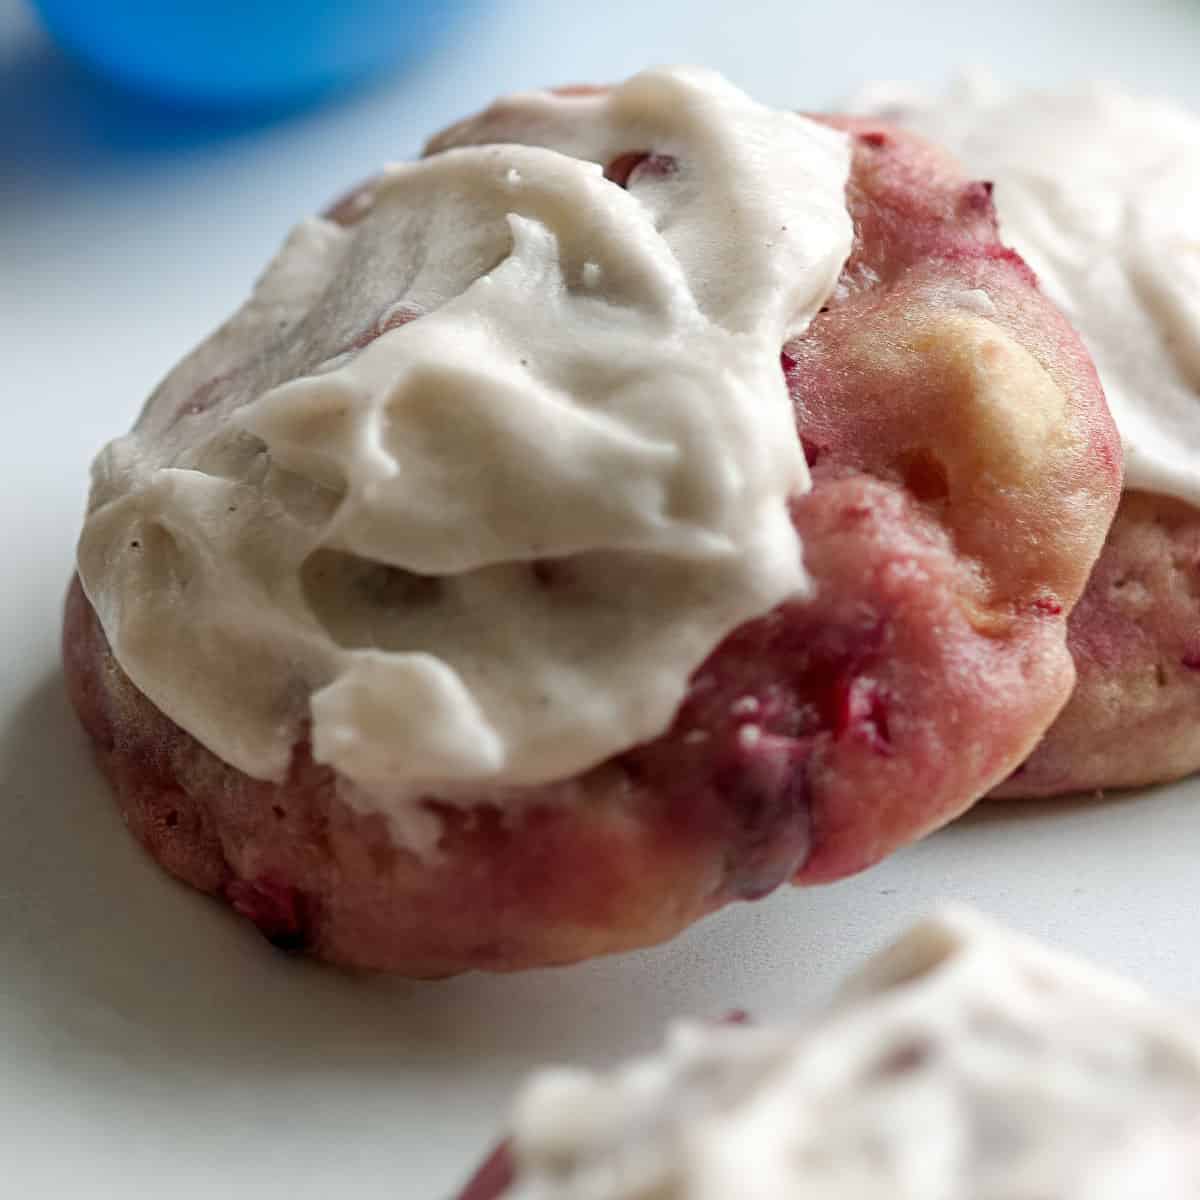 Fresh apple and cranberry cookie with icing.